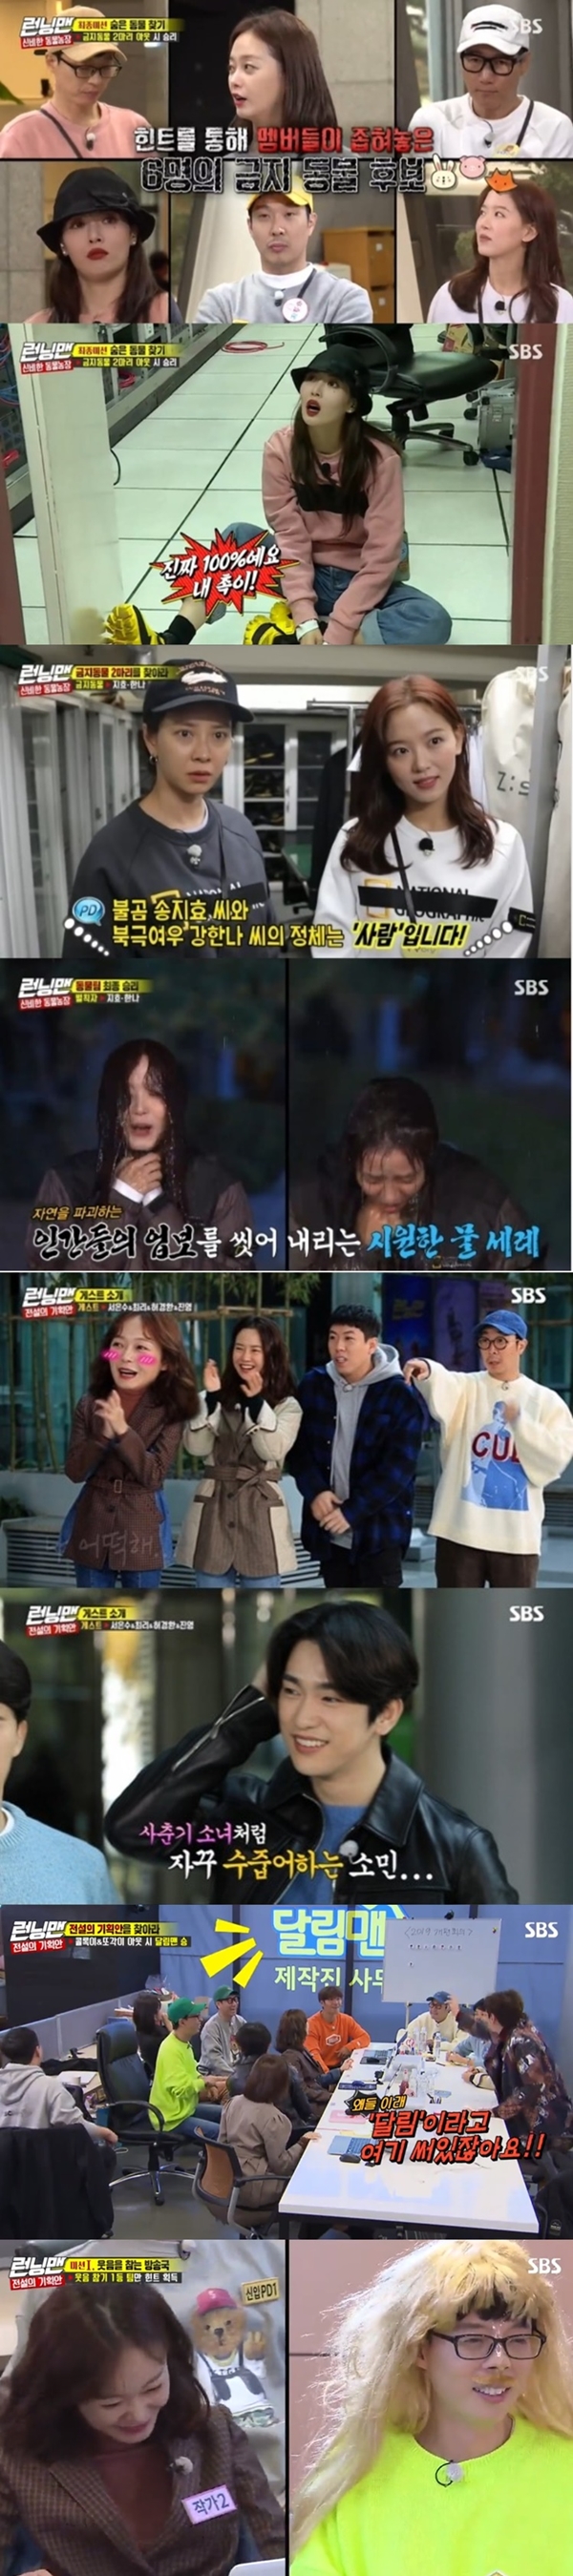 Running Man is on the rise to 10% of Per minute top TV viewer ratings.According to Nielsen Korea on the 18th, SBS entertainment program Running Man, which was broadcast on the 17th, showed an average TV viewer rating of 5.4% and 2 8.3%, respectively, showing TV viewer ratings for the sixth consecutive week.Per minute Top TV viewer ratings hit 10 percent.On this day, the broadcast was decorated with the final race of Mysterious Animal Farm and started to search for prohibited animals.If you find a forbidden animal and in-N-Out Burger, the normal animal wins, but the forbidden animal was able to use the closed area.When an In-N-Out Burgered animal is created by a prohibited animal, a closed area is created and all hints in the closed area disappear, as well as the animal is included in it.Yoo Jae-Suks performance shone in the face of everyone questioning each other.Yoo Jae-Suk found out that the forbidden animal was a person, and he noticed that Kang Han-Na and Song Ji-hyo were sisters and bears who became foxes respectively.In the meantime, Kang Han-Na and Song Ji-hyo respectively targeted Hyun-ah and group Everglow Shihyeon in-N-Out Burger and Yoo Jae-Suk.Yoo Jae-Suk informed members of the identity of the banned animals in an urgent situation and eventually the banned animals Kang Han-Na and Song Ji-hyo were in-N-Out Burger and received the final penalty.The Legendary Plan Race, which was guested by Gods Seven Jinyoung, actor Seo Eun-soo, Choi Lee and comedian Hur Kyung-hwan, was also released.Jeon So-min welcomed Jinyoung, but he gave a big smile with sweat.Since then, the members have been divided into PD, writer, and new PD team of Ralim Man program and started to search for Kolok Lee and Daegak which is reported as a ghost story of broadcasting company.The first mission was to find a laugh: You have to put up with laughter under any circumstances, and if you laugh, you have to carry out a dressing penalty.In the midst of a fierce laughter confrontation, a questionable tool uncle appeared in front of the members.Everyone was nervous about the powerful smile and this scene was the best minute with Per minute top TV viewer ratings of 10%.